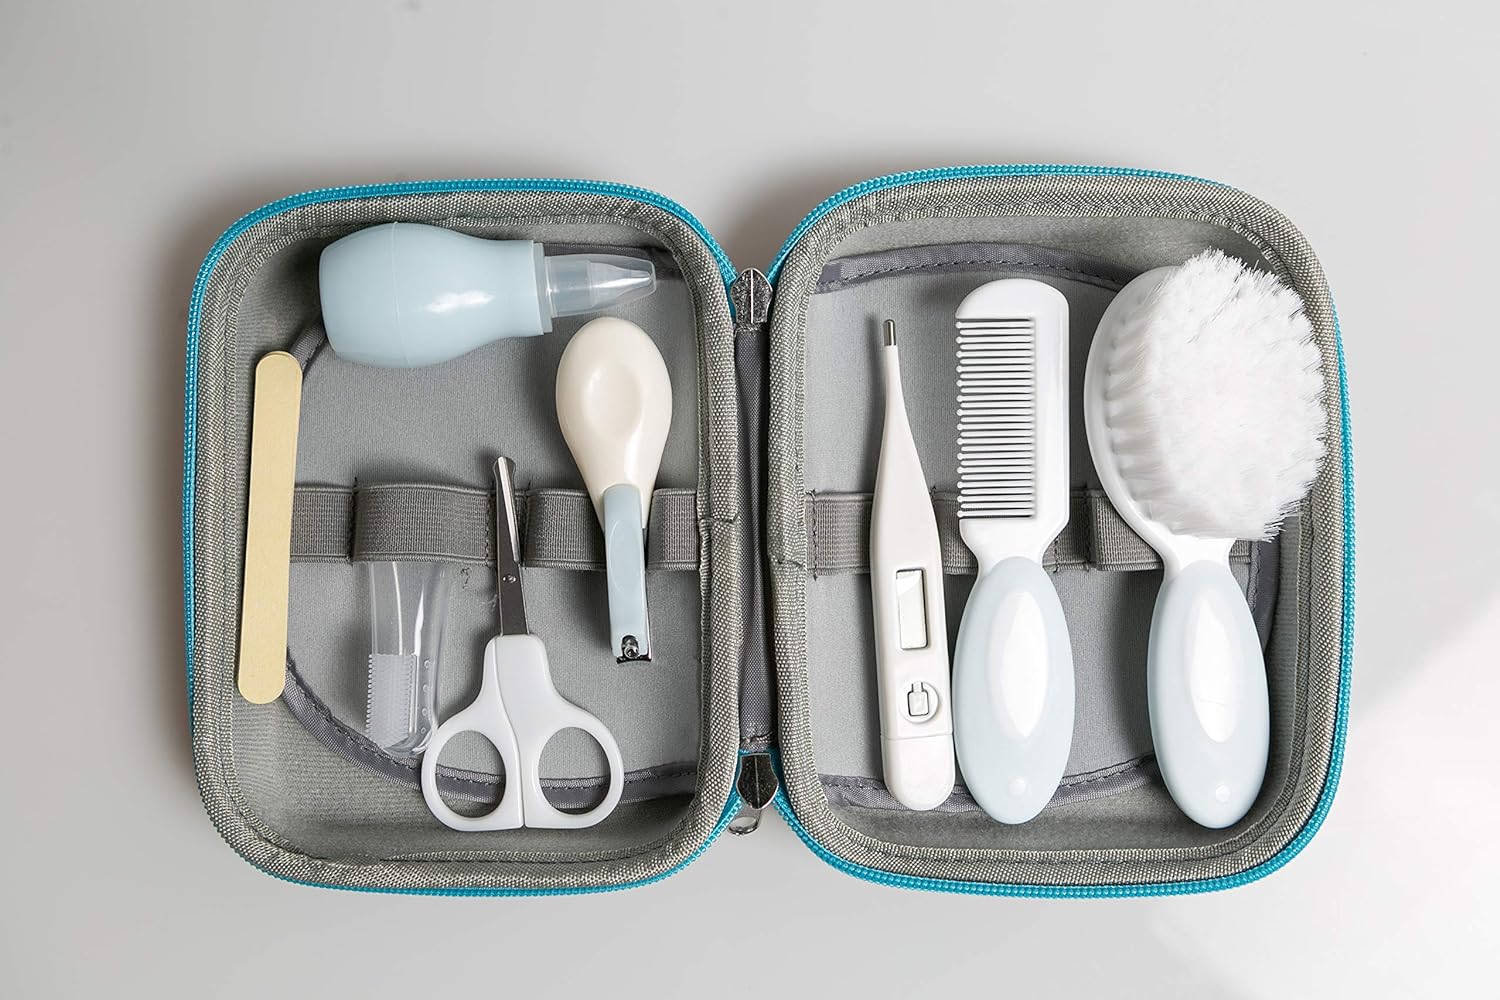 Baby Grooming Kit Review: Essential Tools for Your Little One